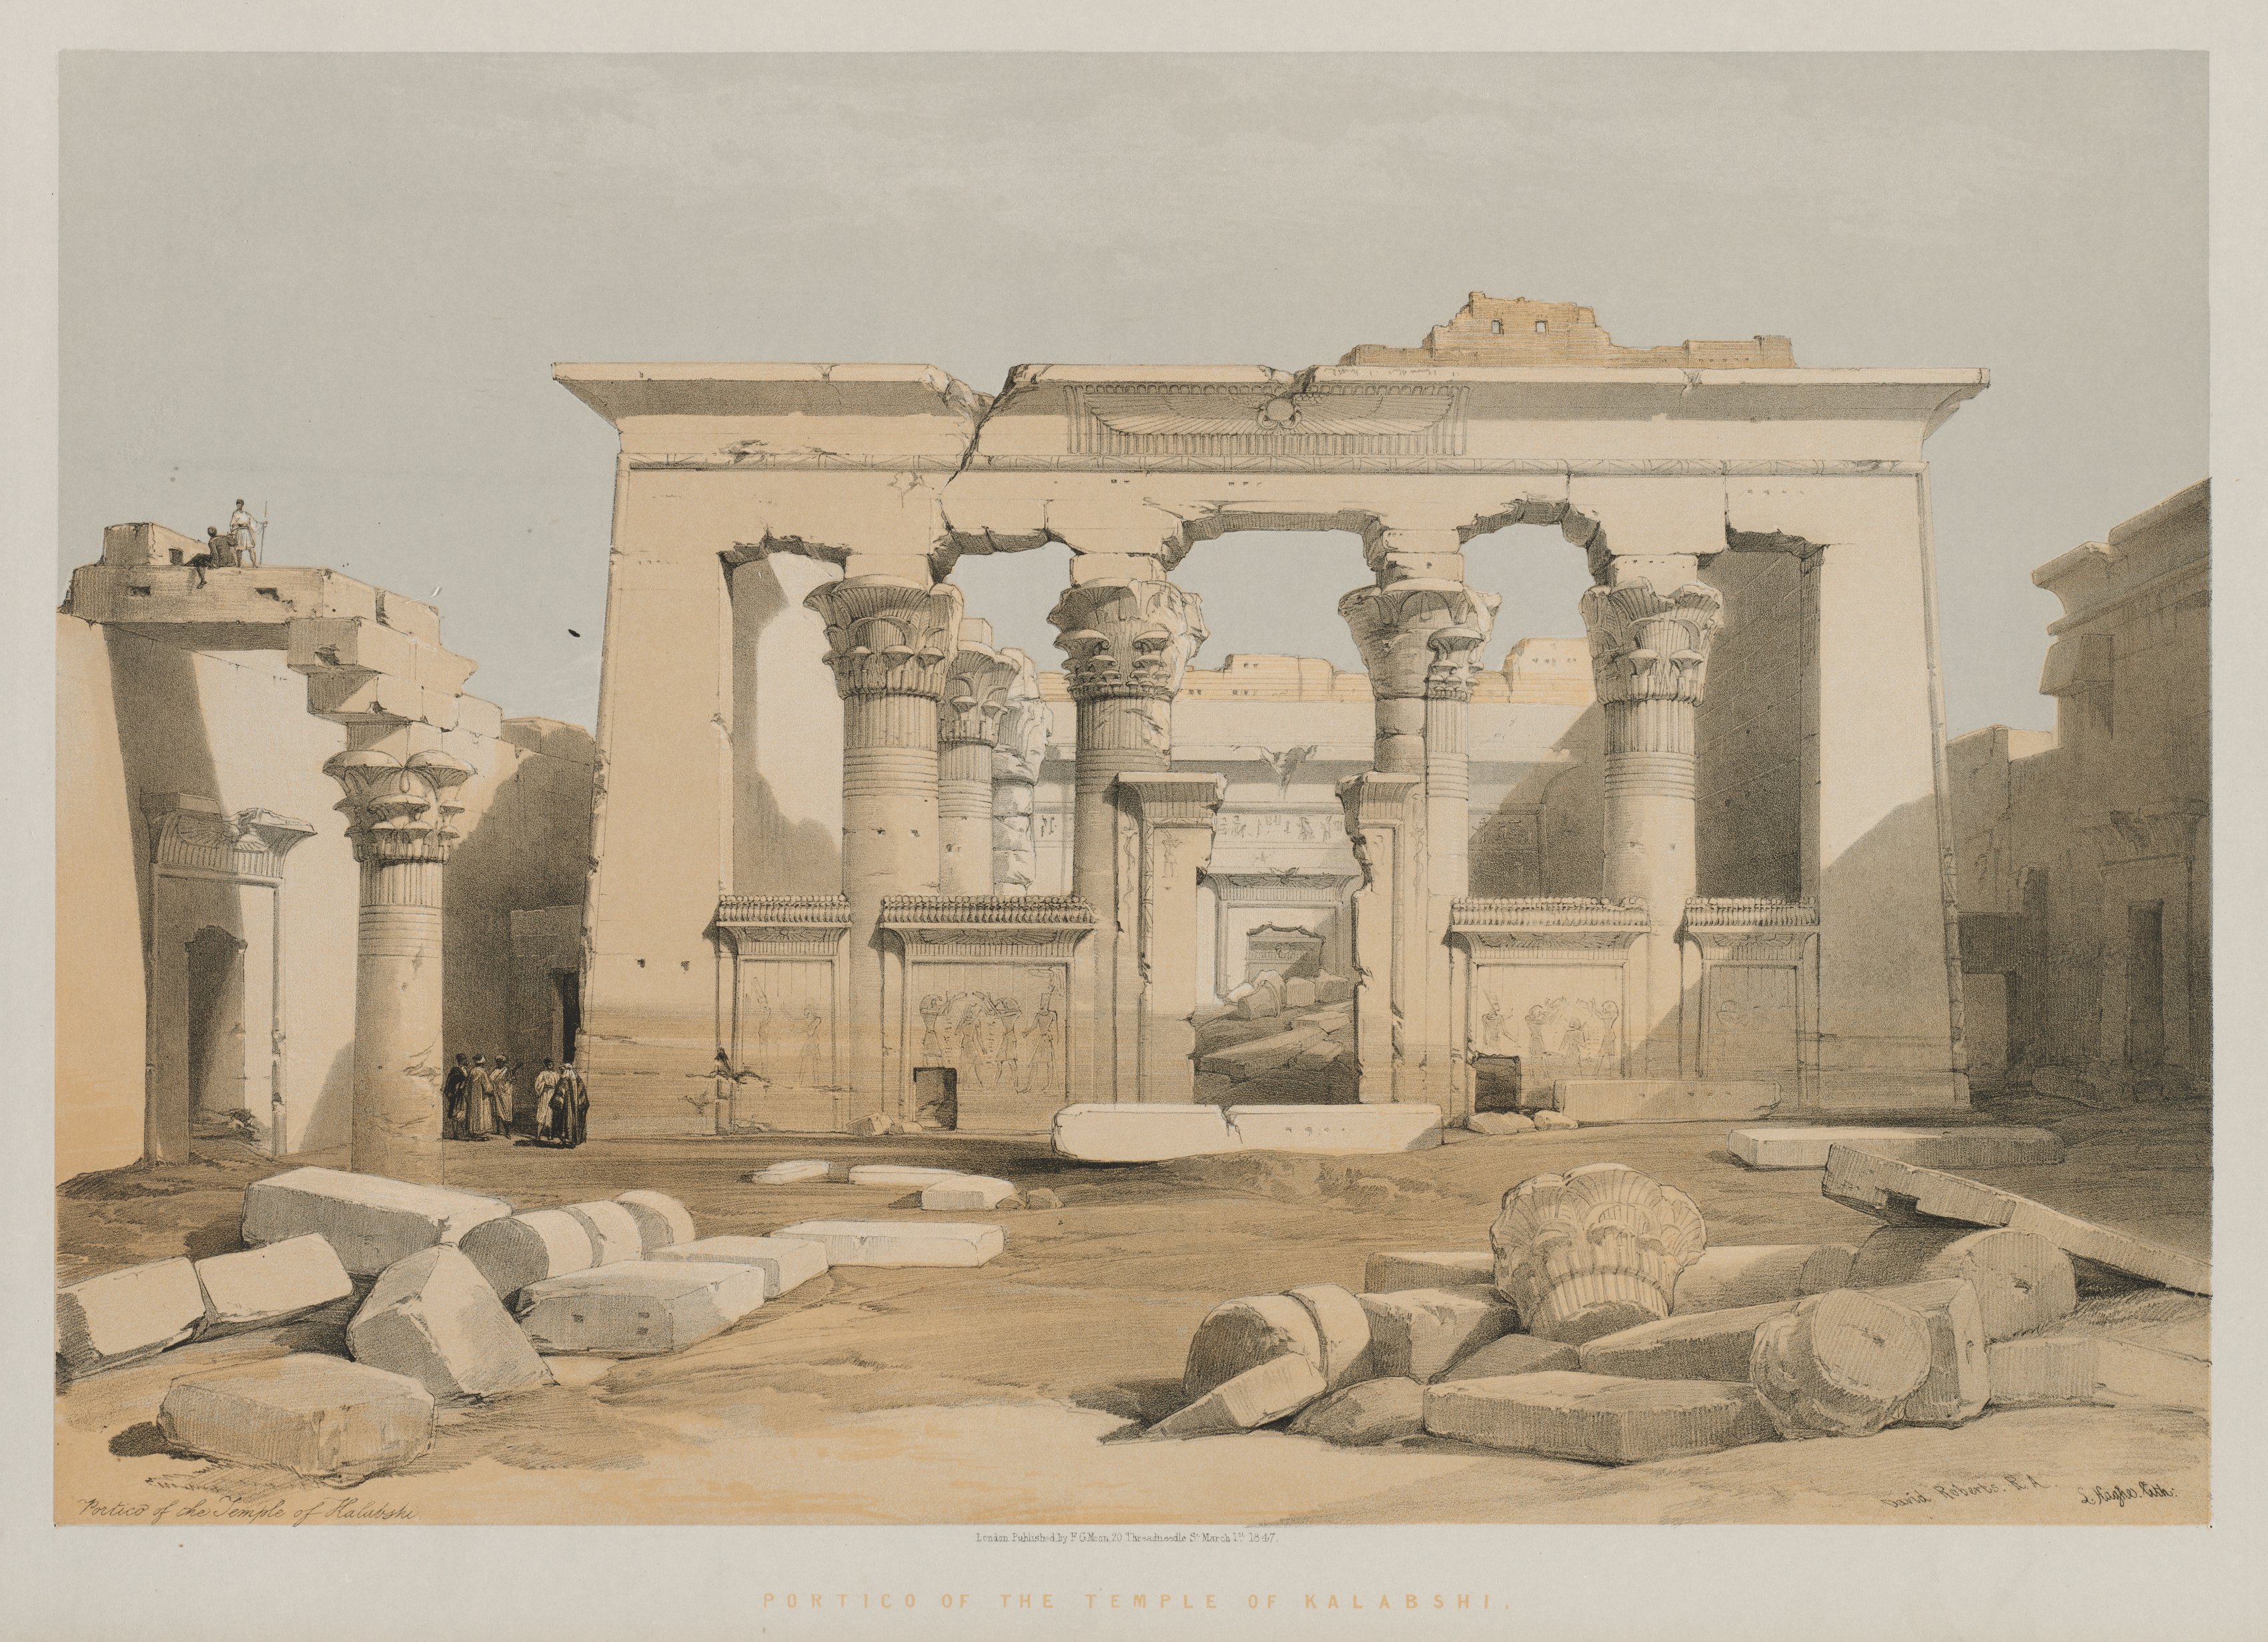 Egypt and Nubia, Volume I: Portico of the Temple of Kalabshe